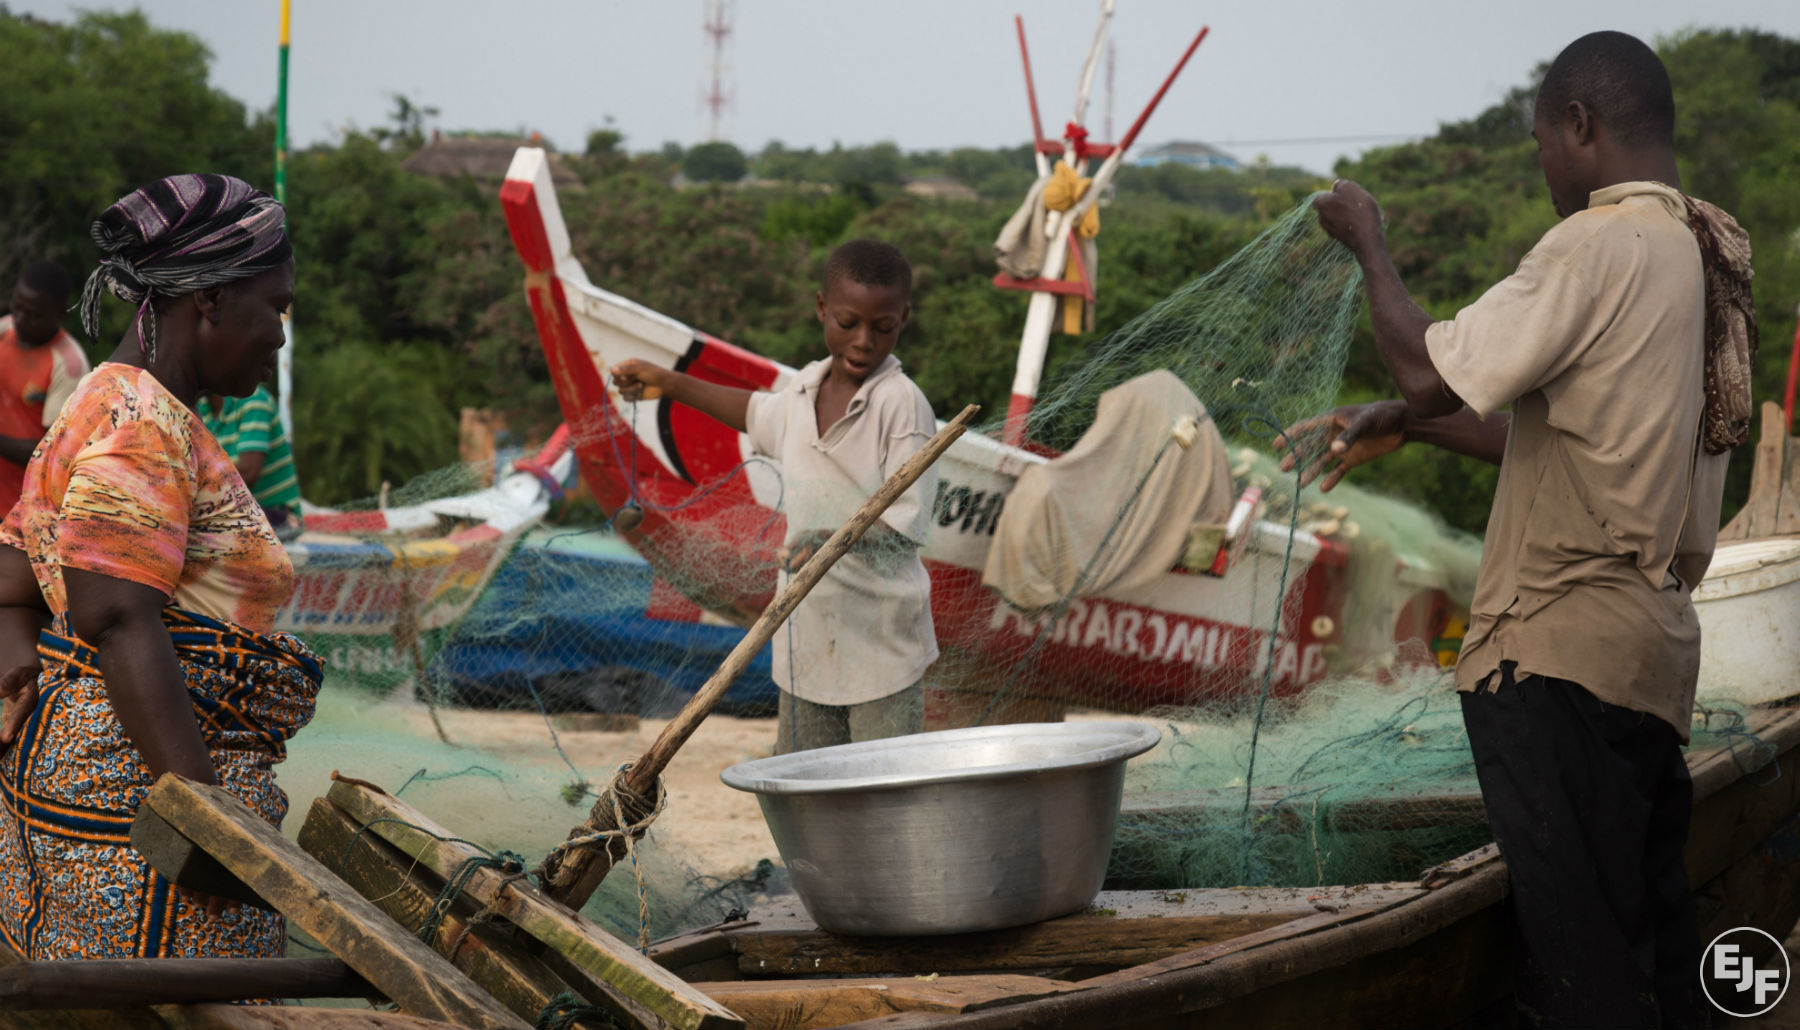 Engaging local communities in reforming Ghana's fishing laws